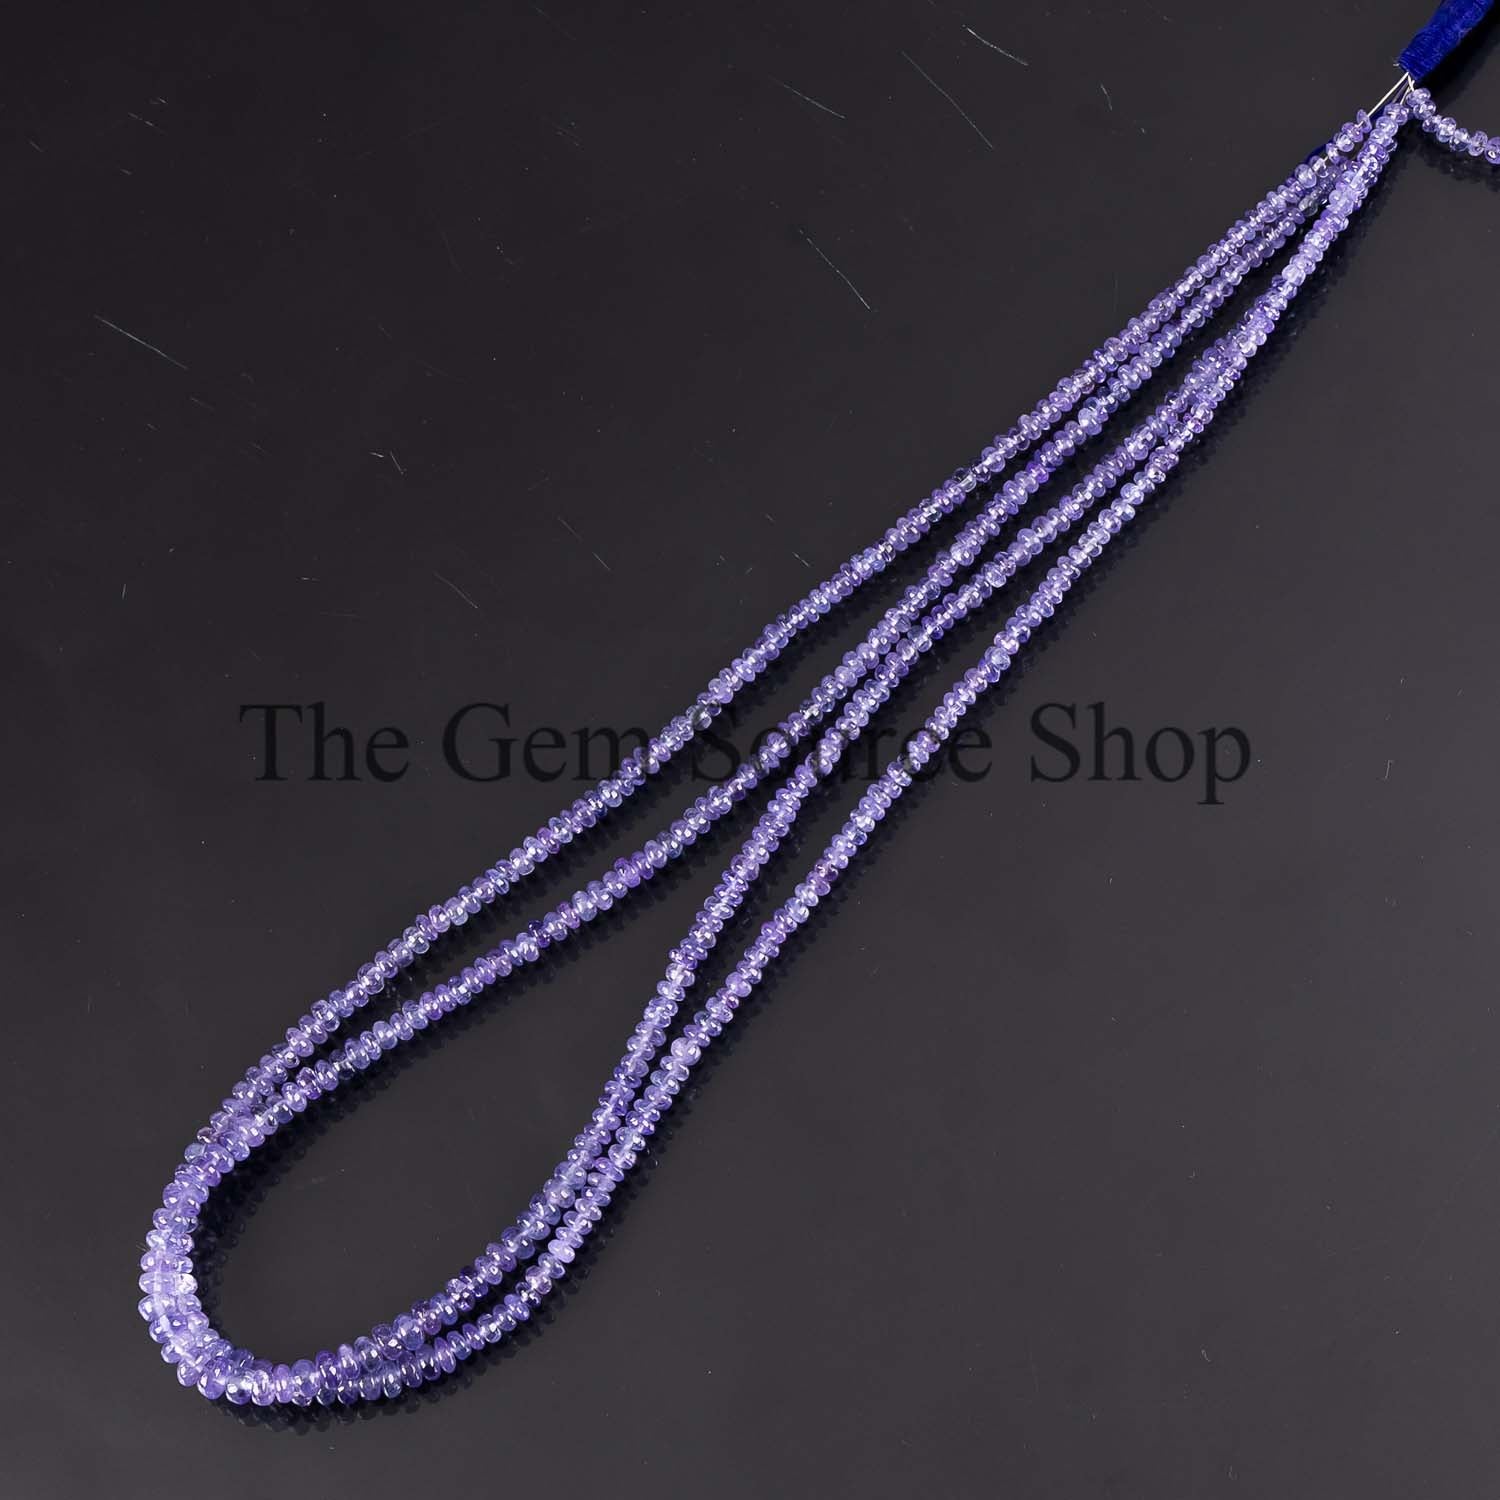 Beads Strand For Jewelry Makings